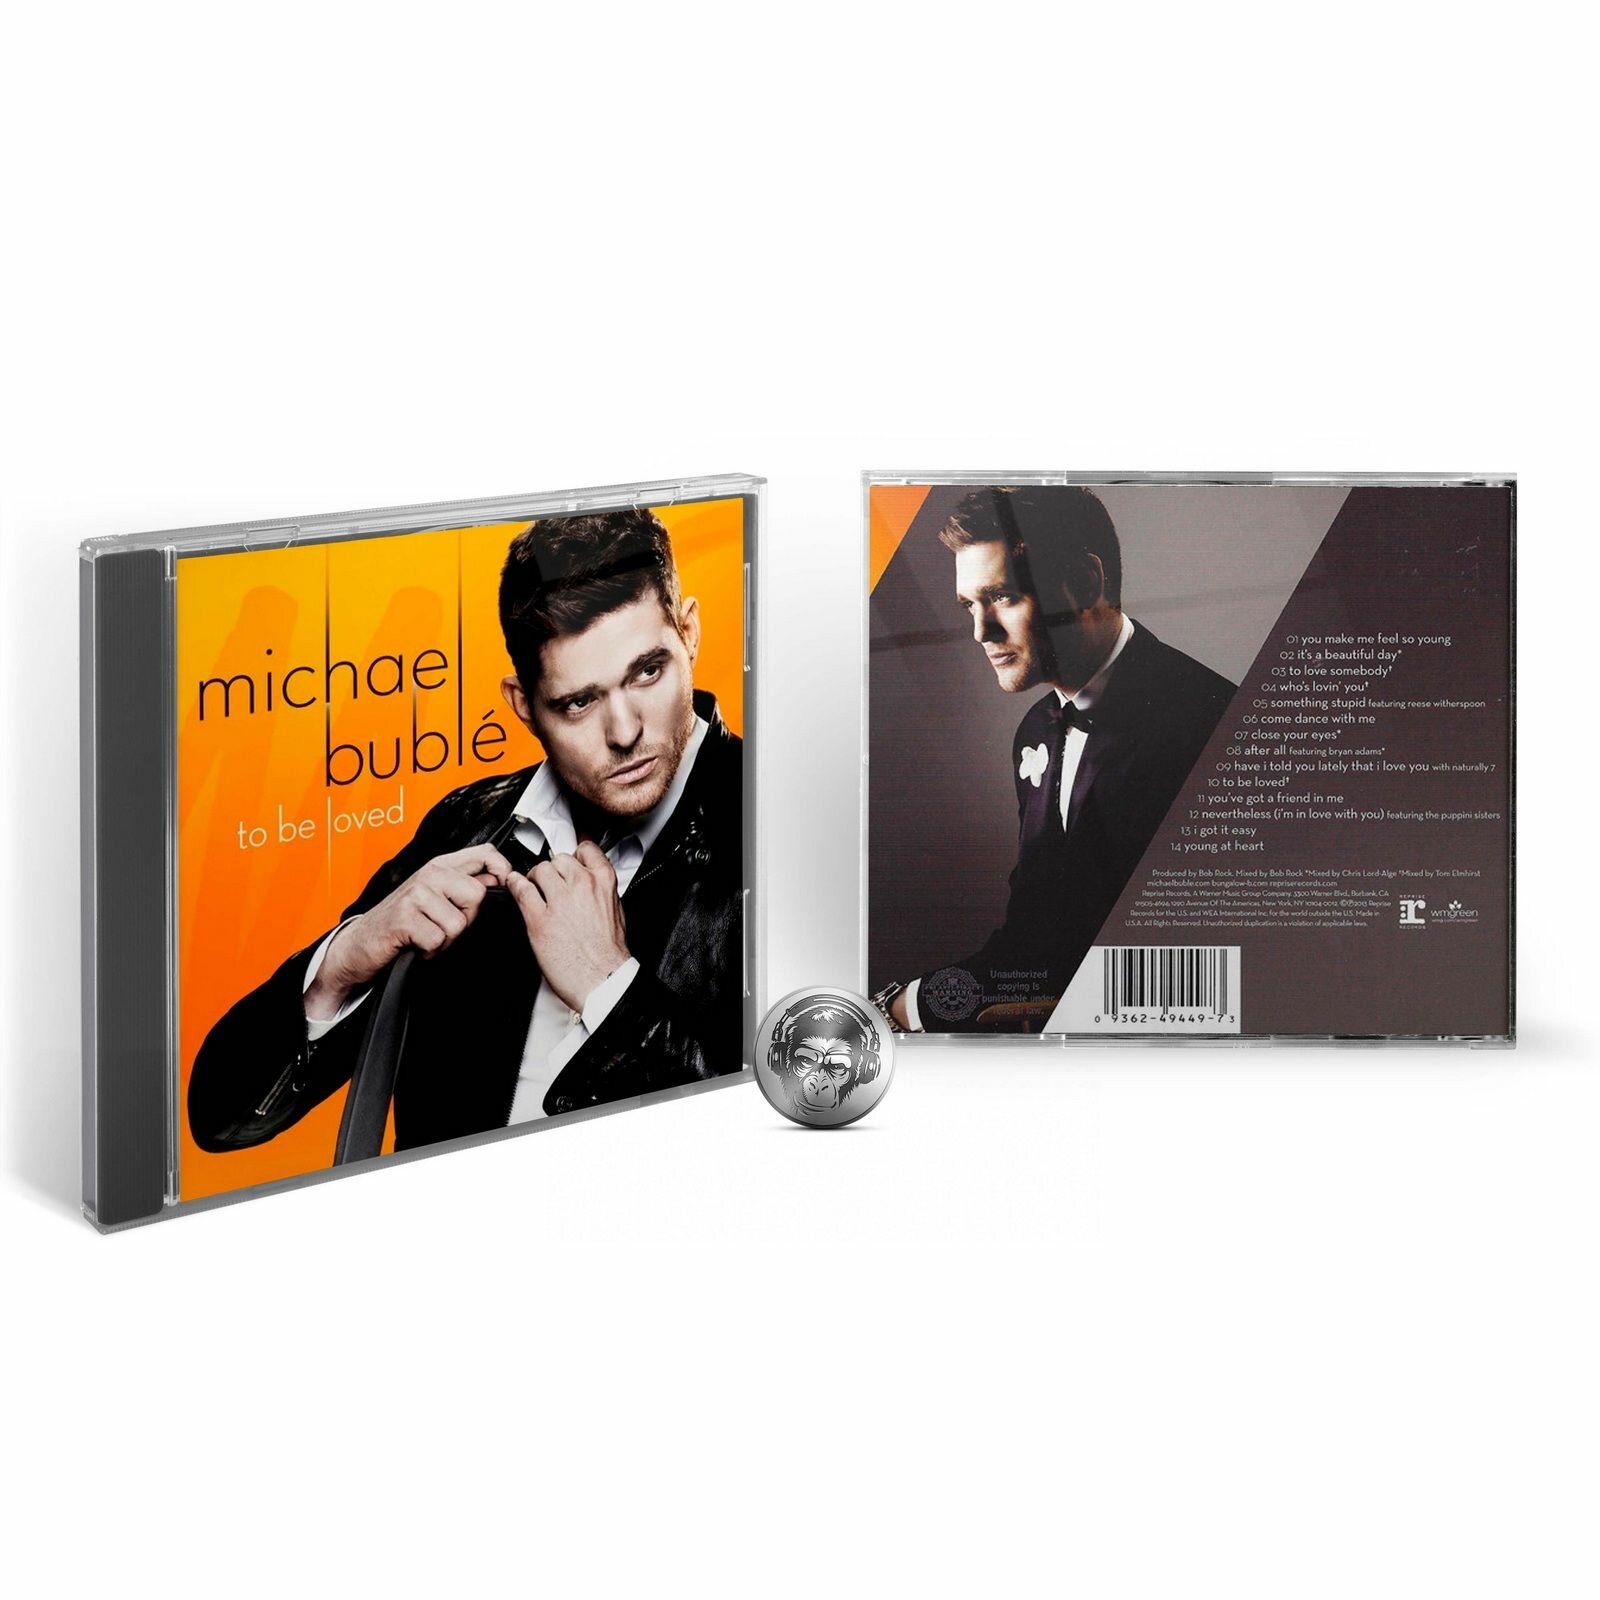 Michael Buble - To Be Loved (1CD) 2013 Reprise, Jewel Аудио диск